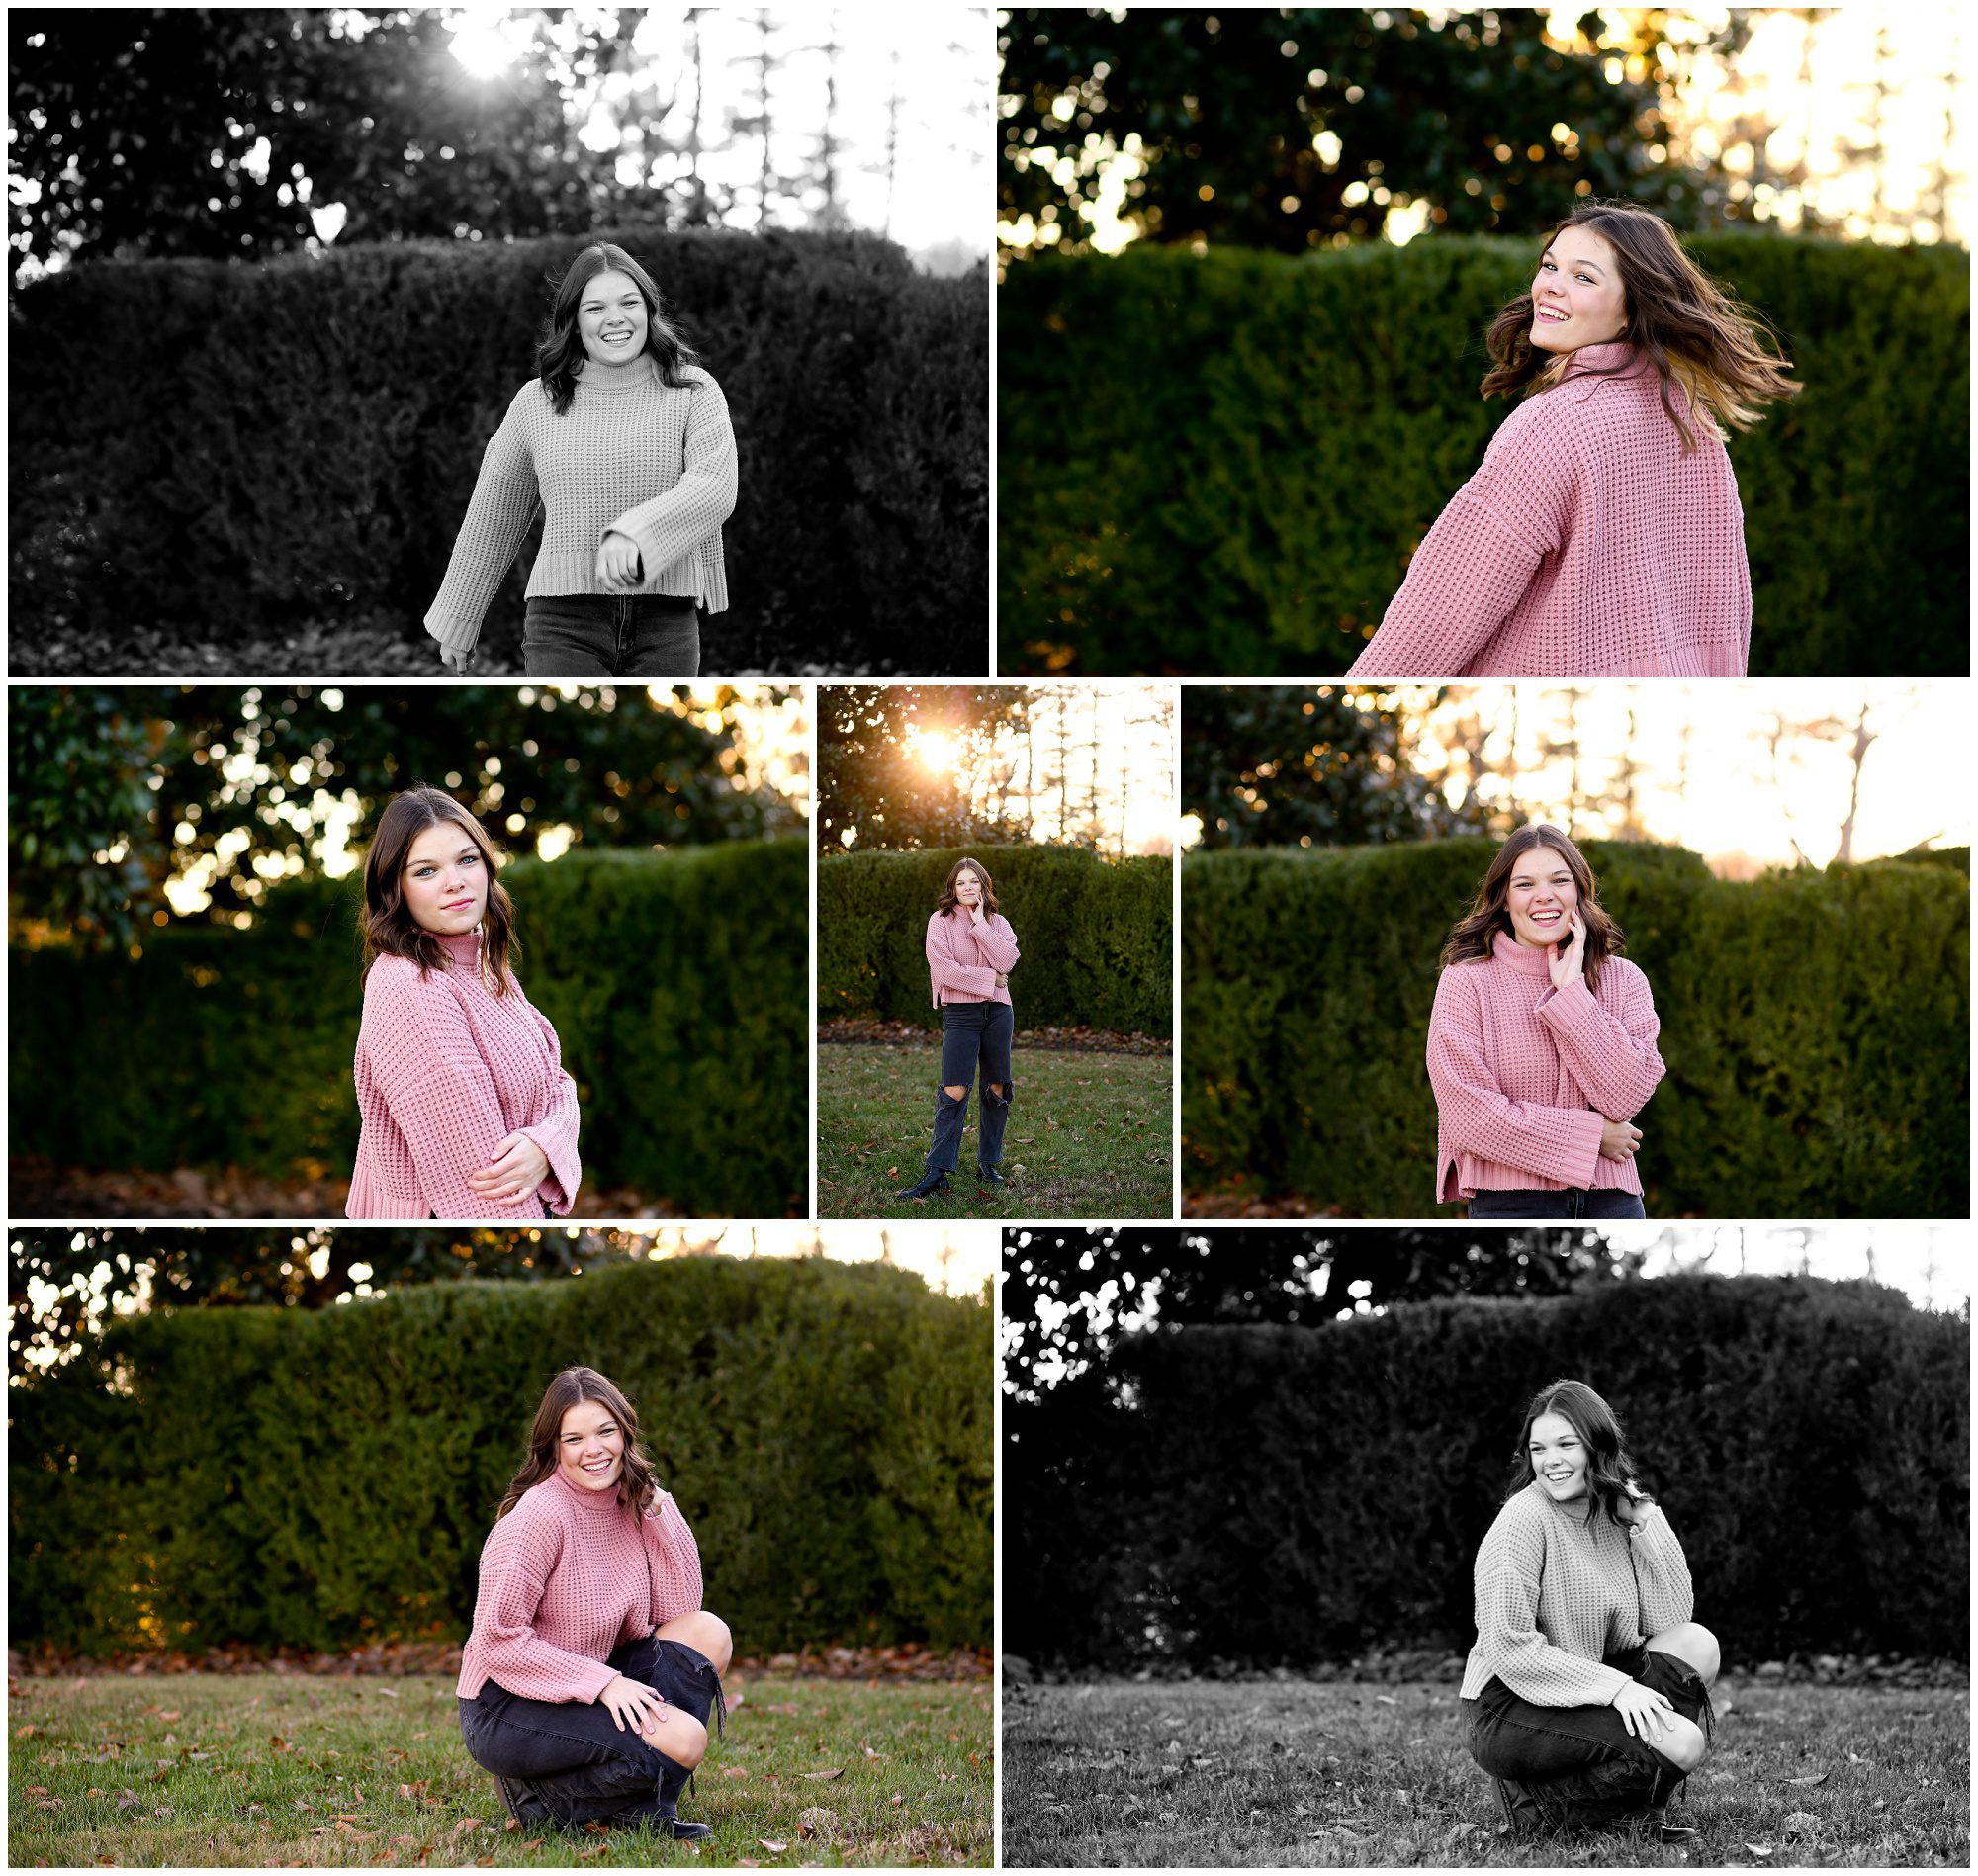 Western Albemarle High School Senior Fall Portraits with Family in Fluvanna County photographer pictures photoshoot sisters wahs graduate charlottesville